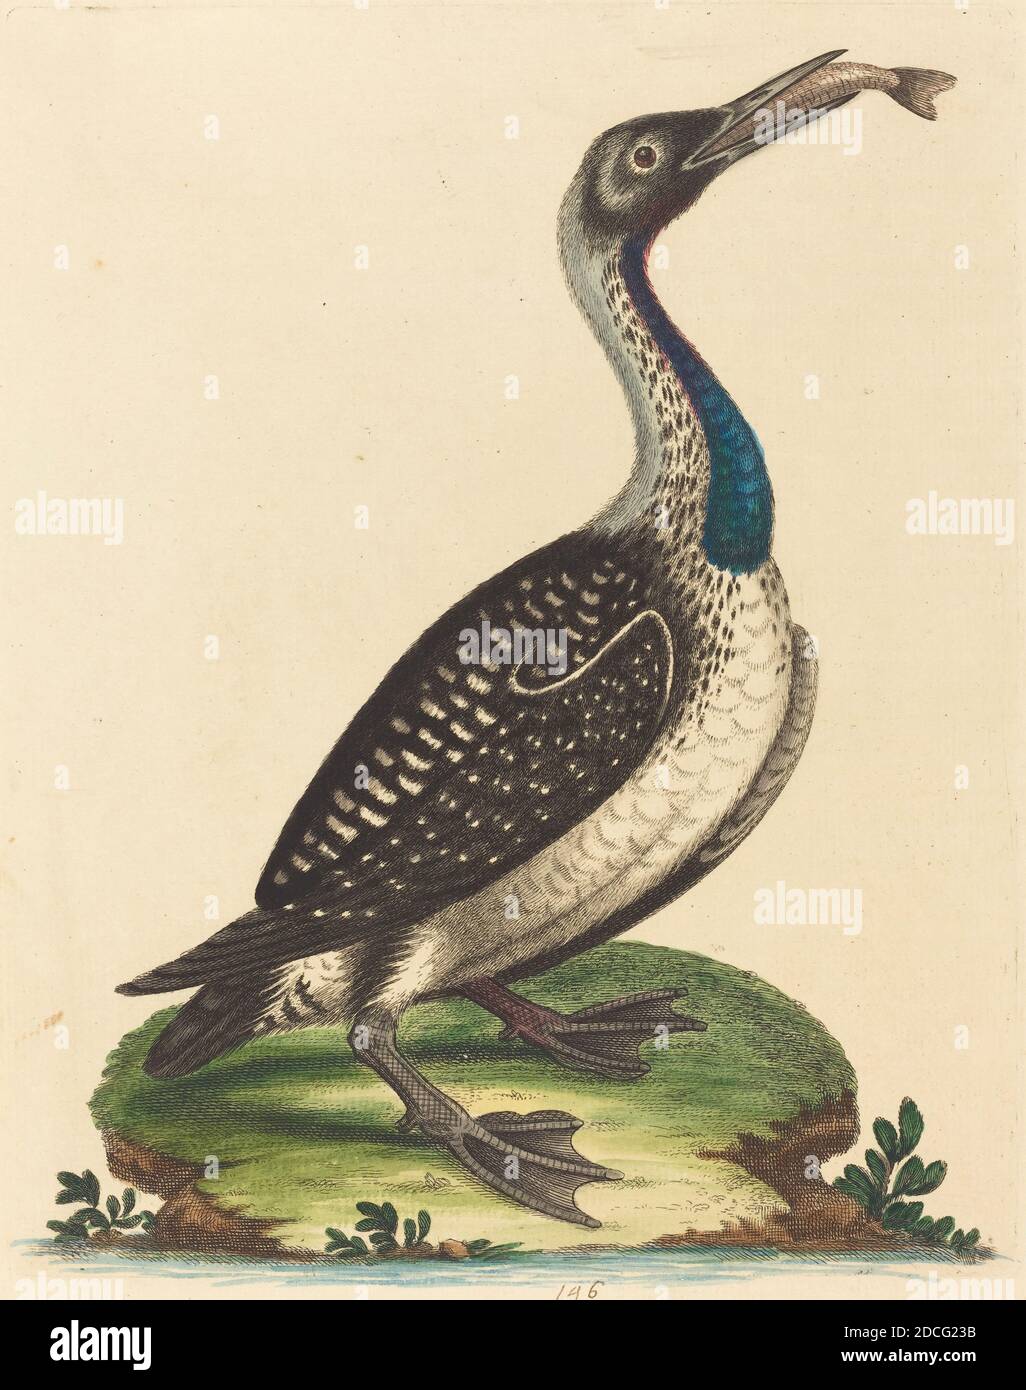 George Edwards, (artist), English, 1694 - 1773, Black and White Water-Fowl with Blue Throat, A Natural History of Uncommon Birds and Animals (1743-51), (series), hand-colored etching on laid paper, plate: 25 x 18.8 cm (9 13/16 x 7 3/8 in.), sheet: 27.9 x 21.4 cm (11 x 8 7/16 in Stock Photo